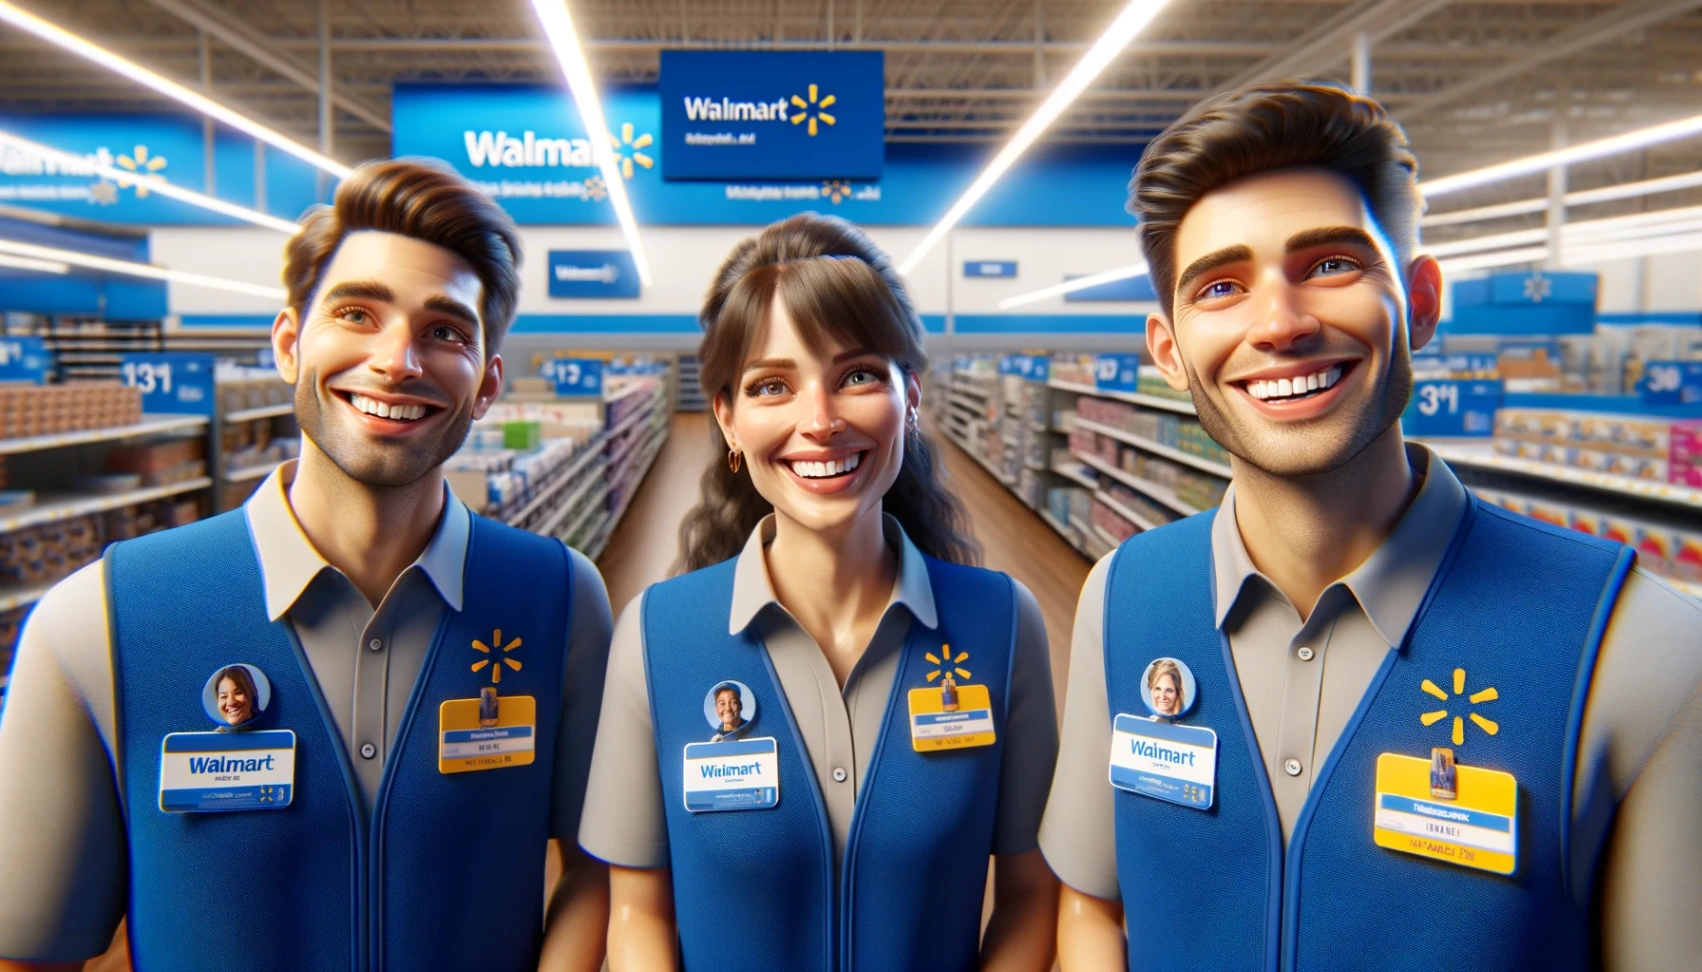 Walmart Jobs Vacancies: Learn Step-by-Step to Apply